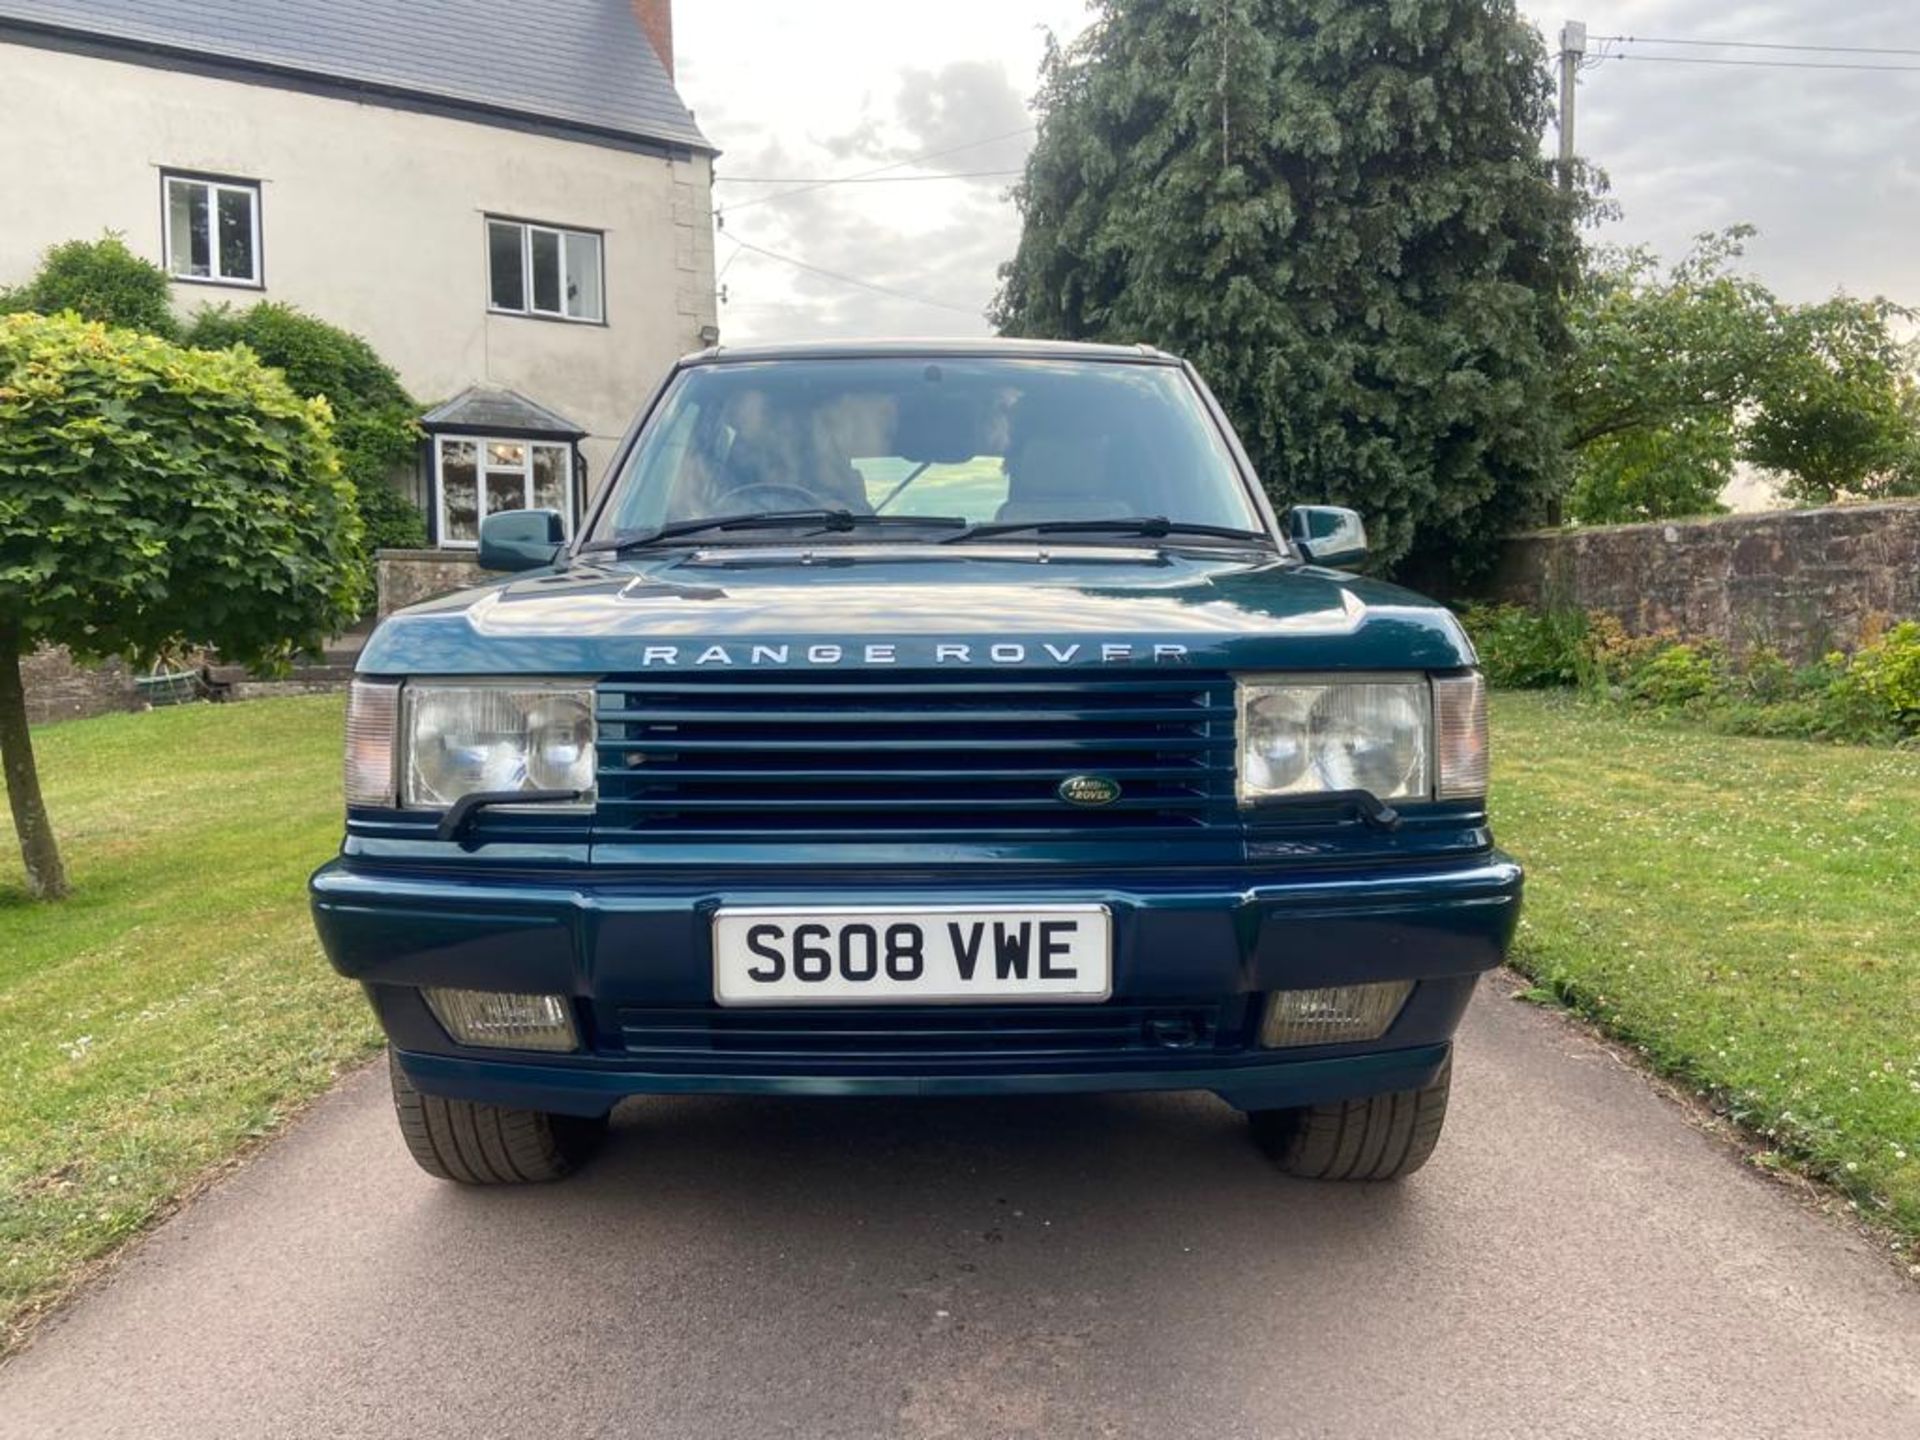 1998 Limited Edition Range Rover P38 - Image 36 of 39